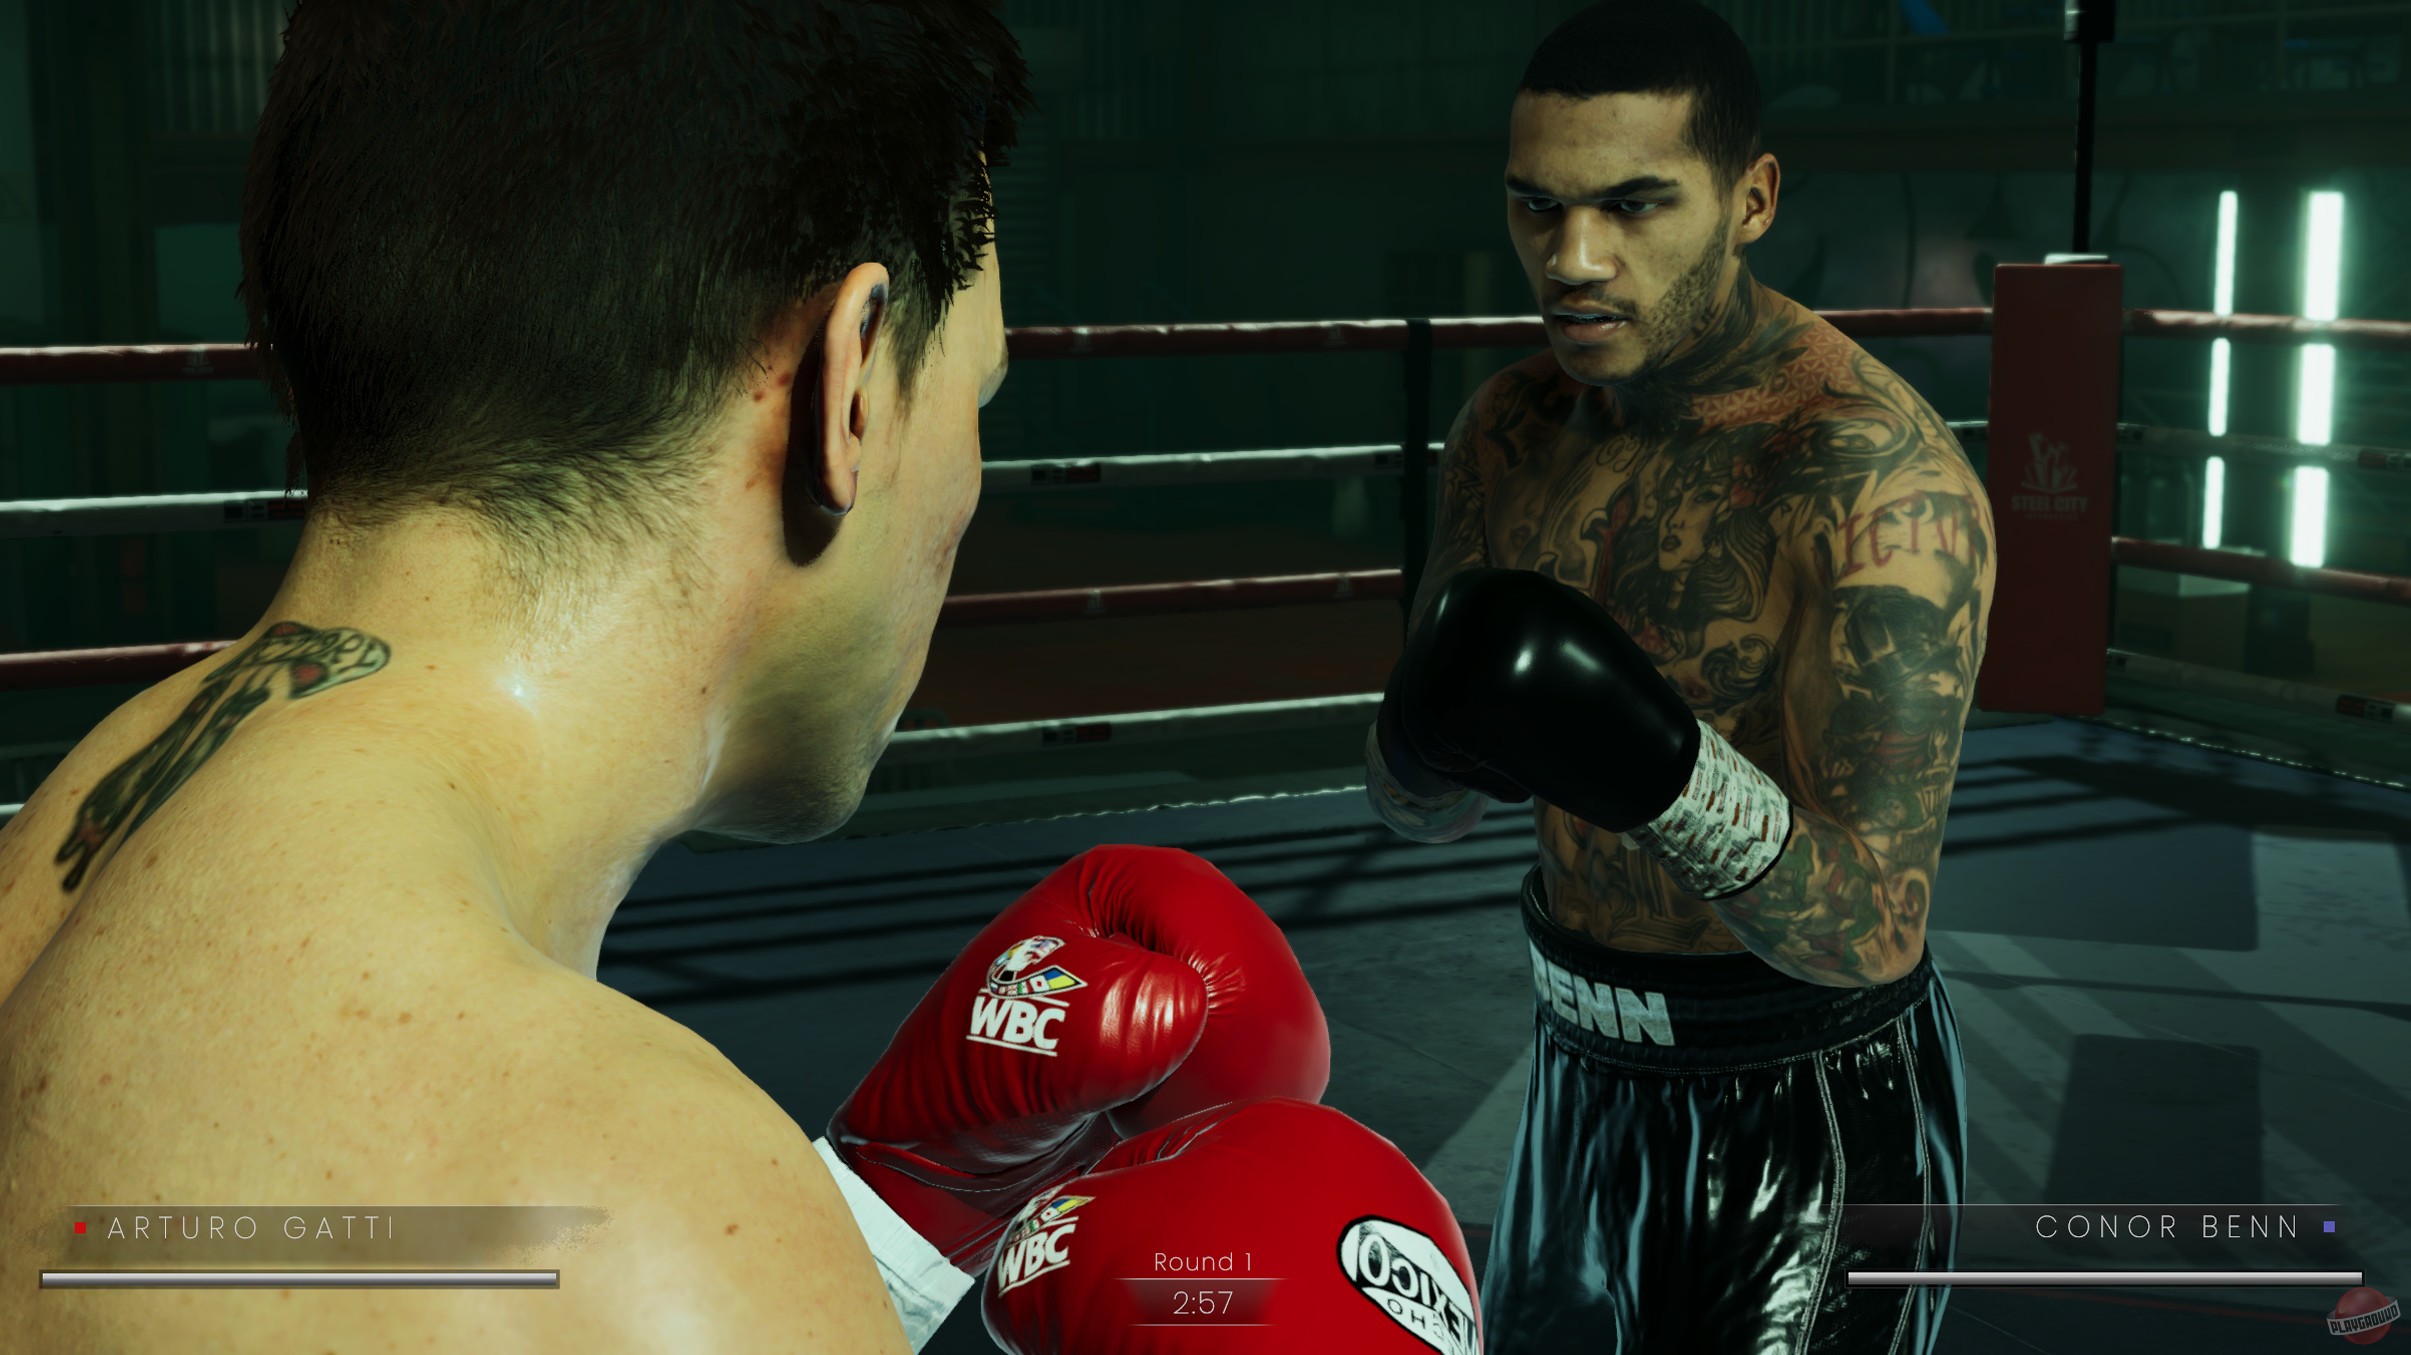 Untitled boxing game hawk. Undisputed Boxing игра. Undisputed ps4. Esports Boxing Club Undisputed. Undisputed (Esports Boxing Club) Xbox one.